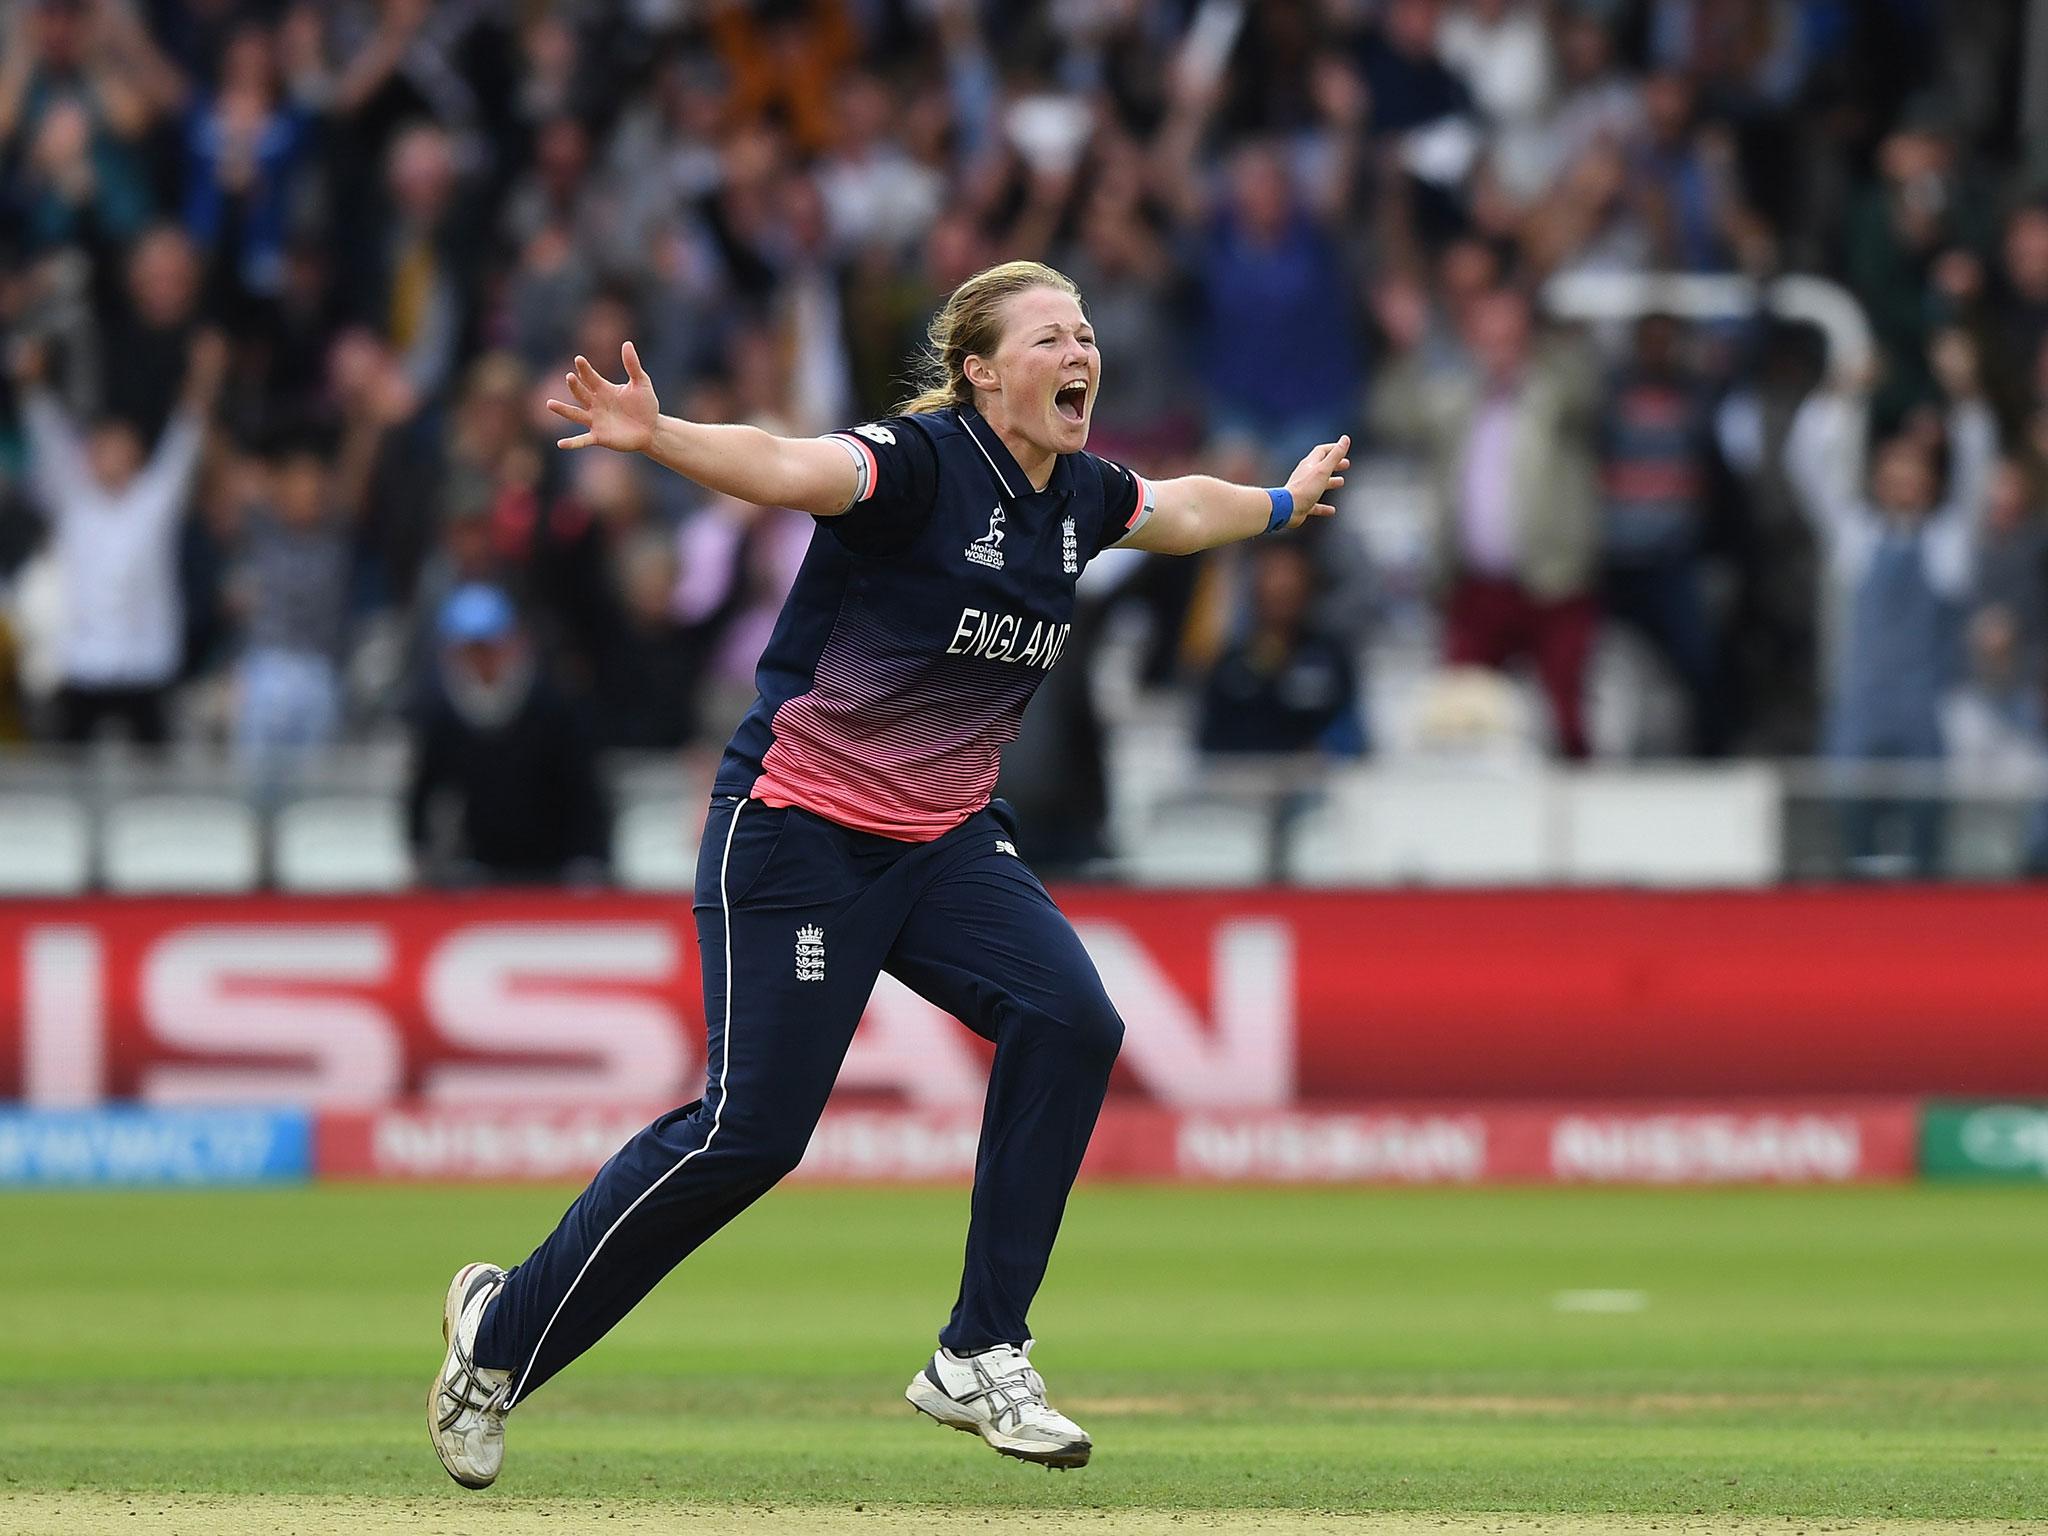 In Knight, Sciver and Shrubsole however, alongside the rest of their World-Cup winning teammates, England have a group of female role models now more visible than ever